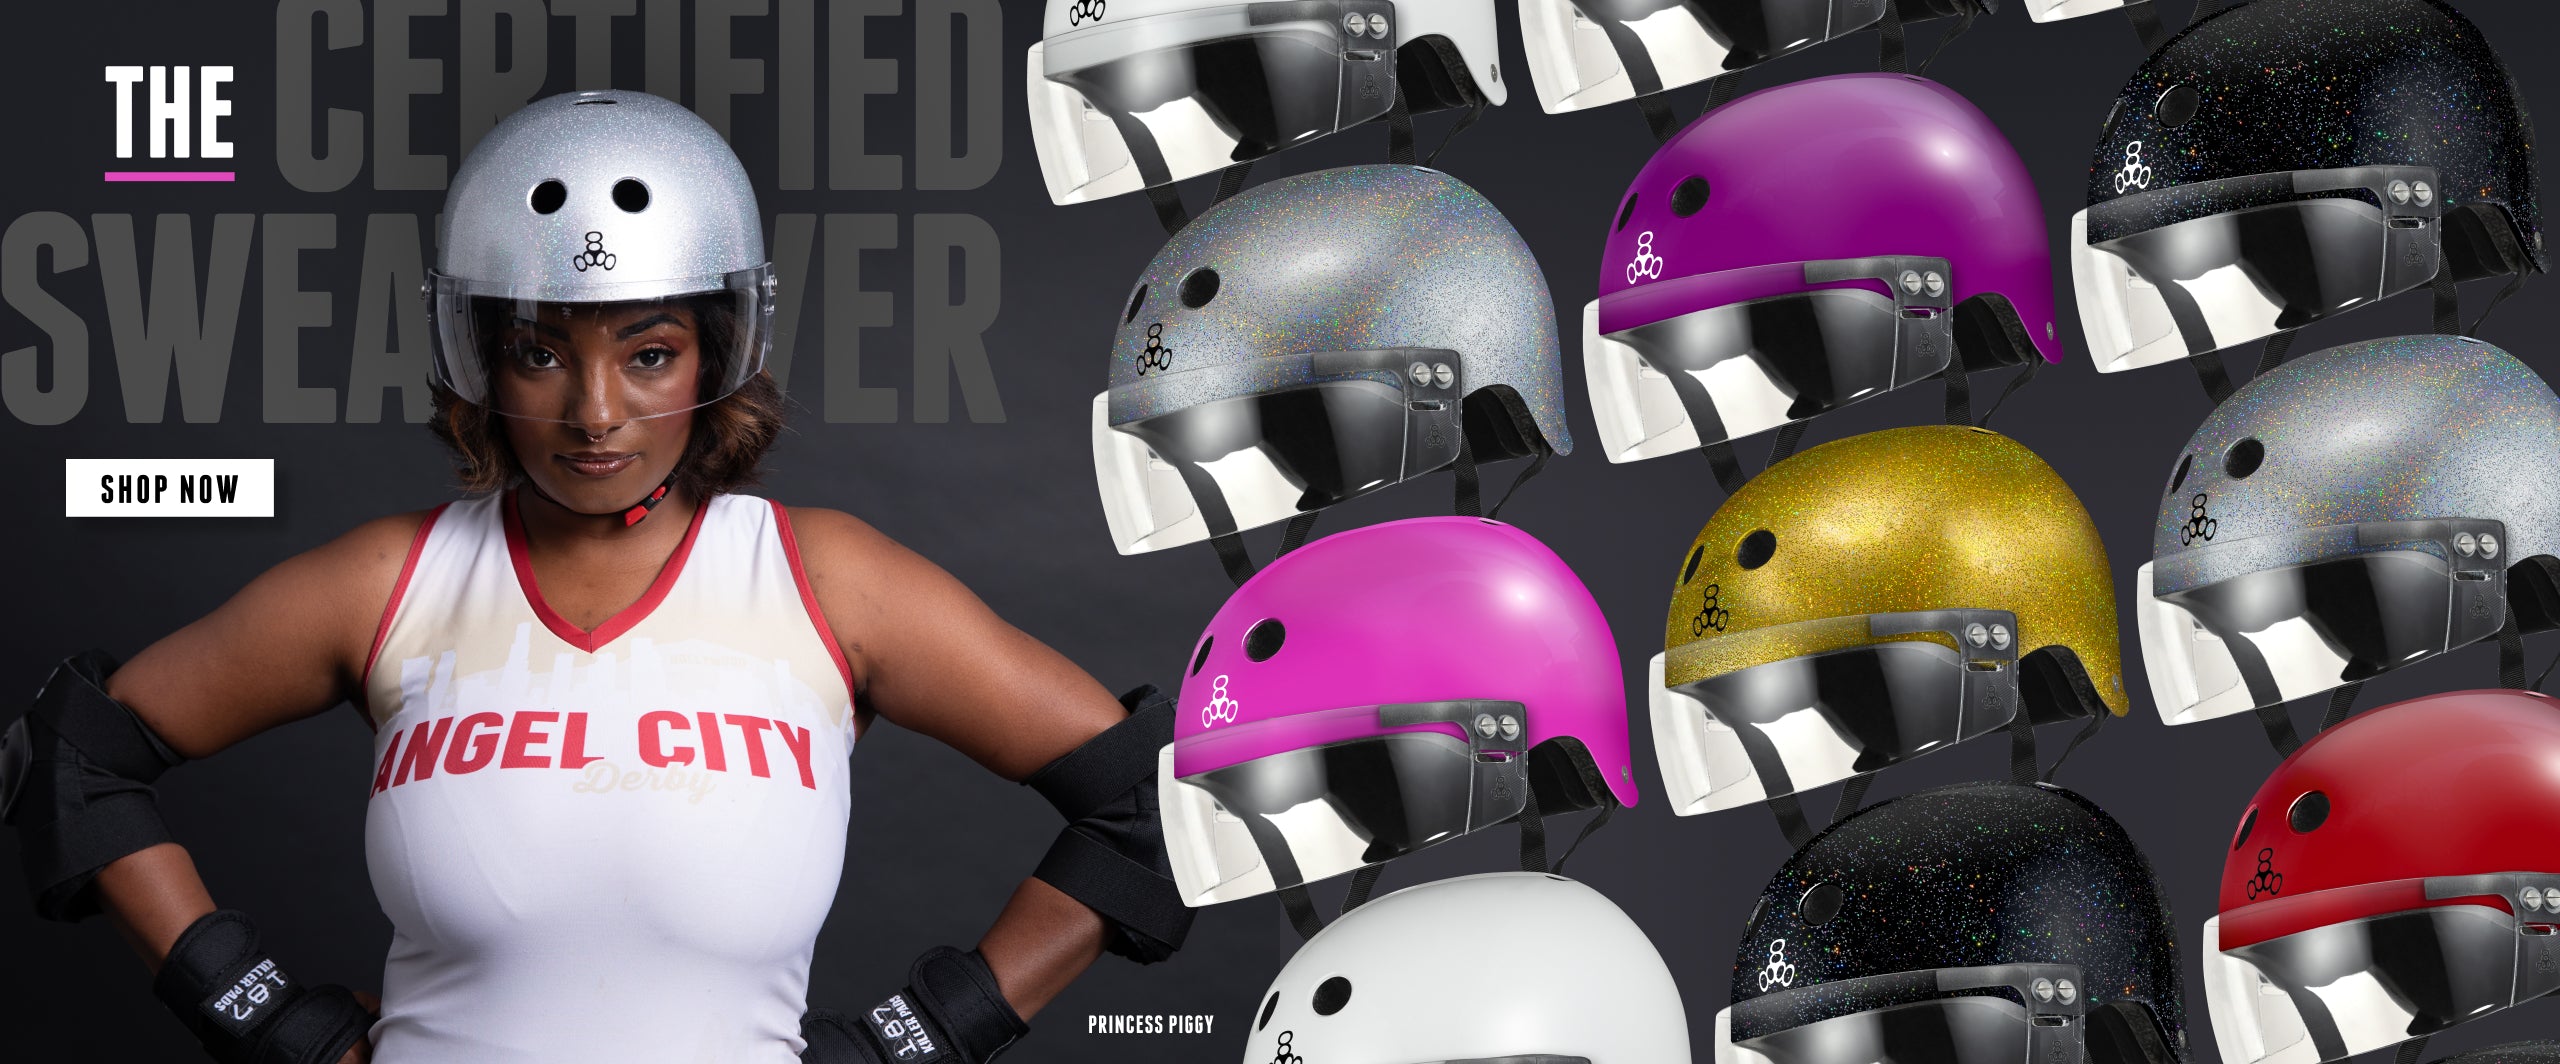 Shop for The Certified Sweatsaver with Visor